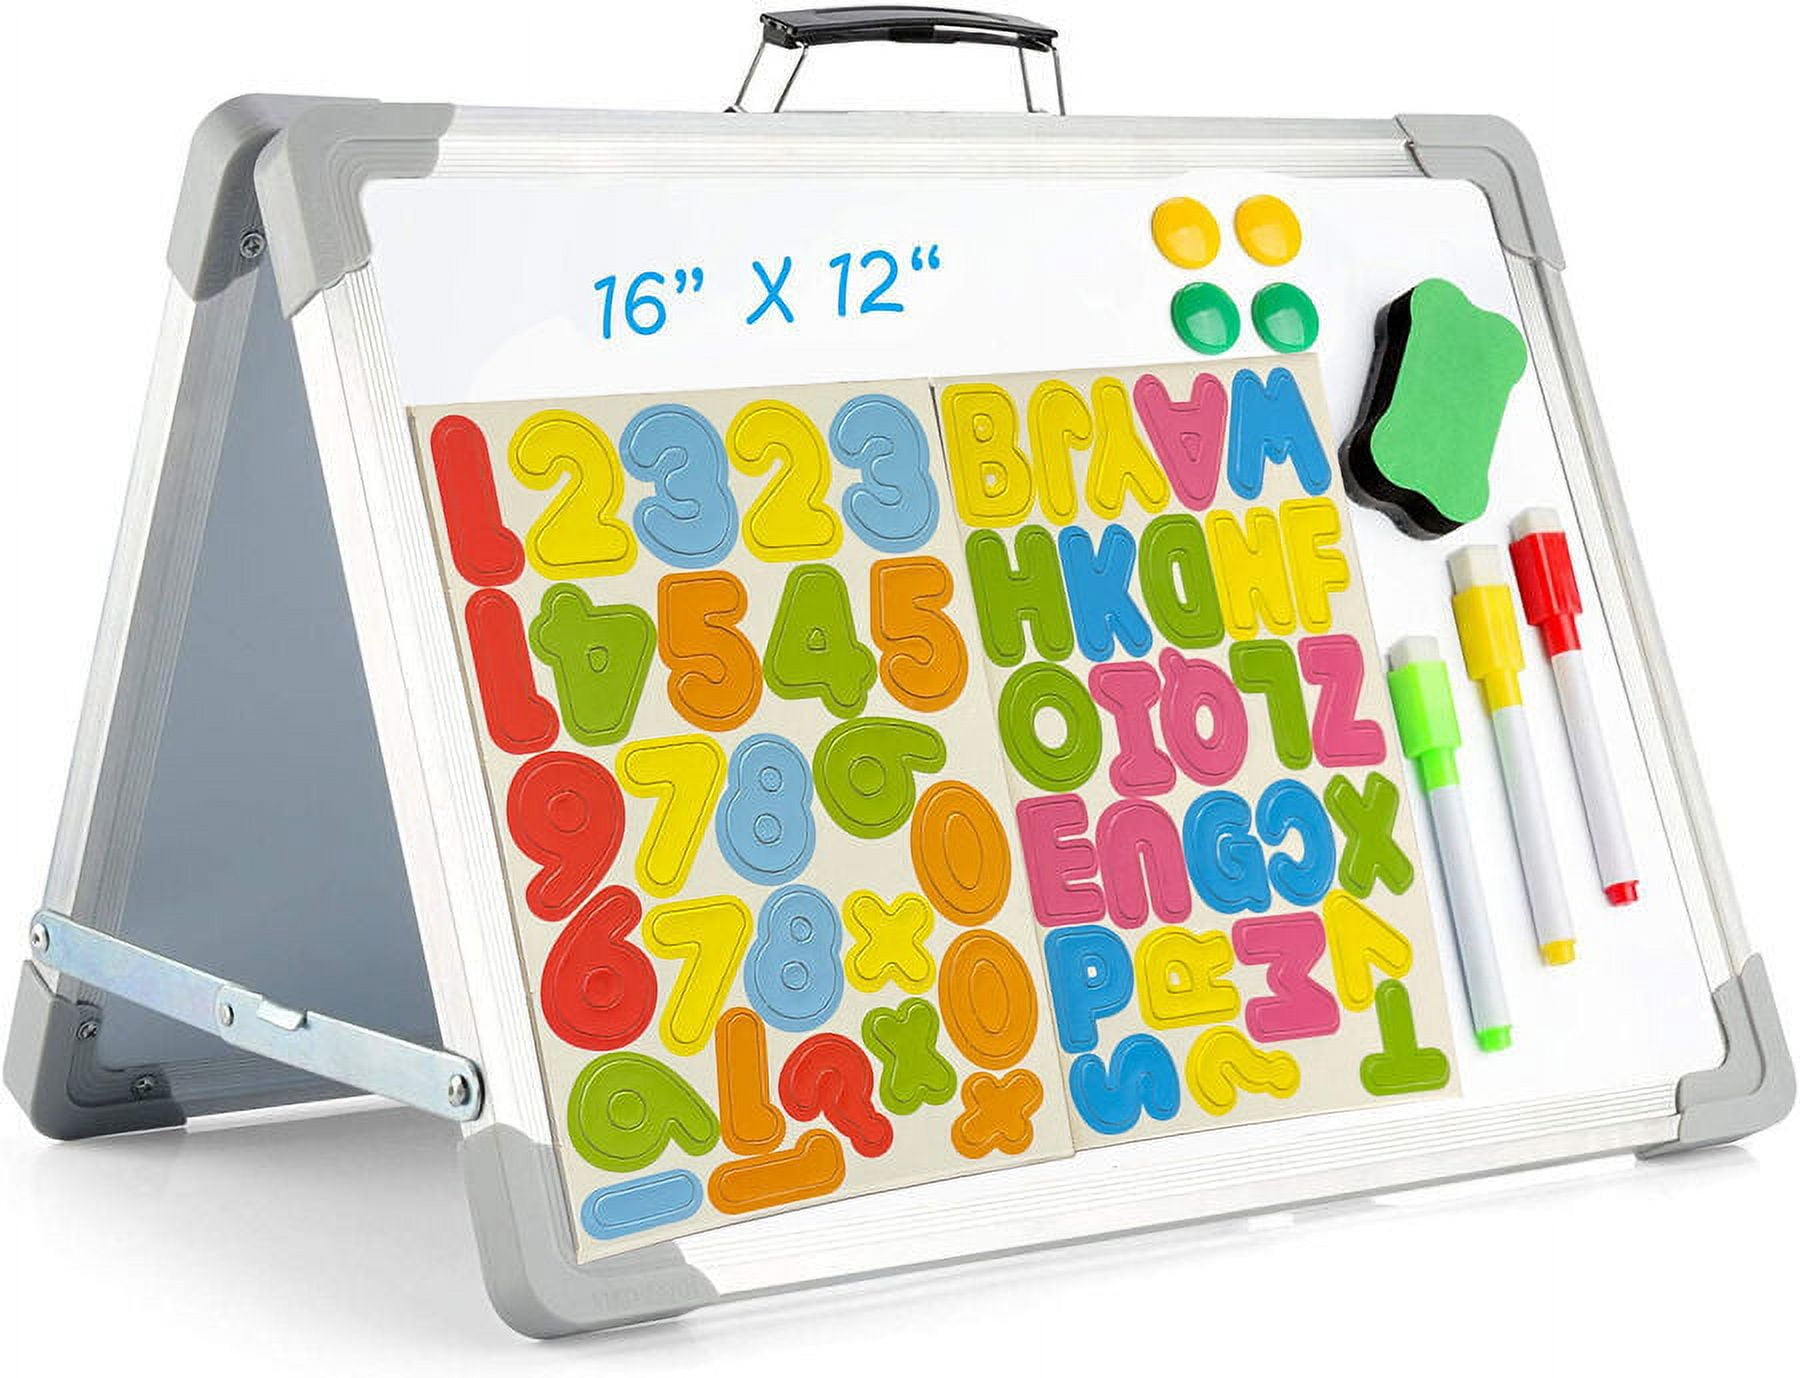 Hercules Series 45.25W x 54.75H Double-Sided Mobile White Board with Pen Tray